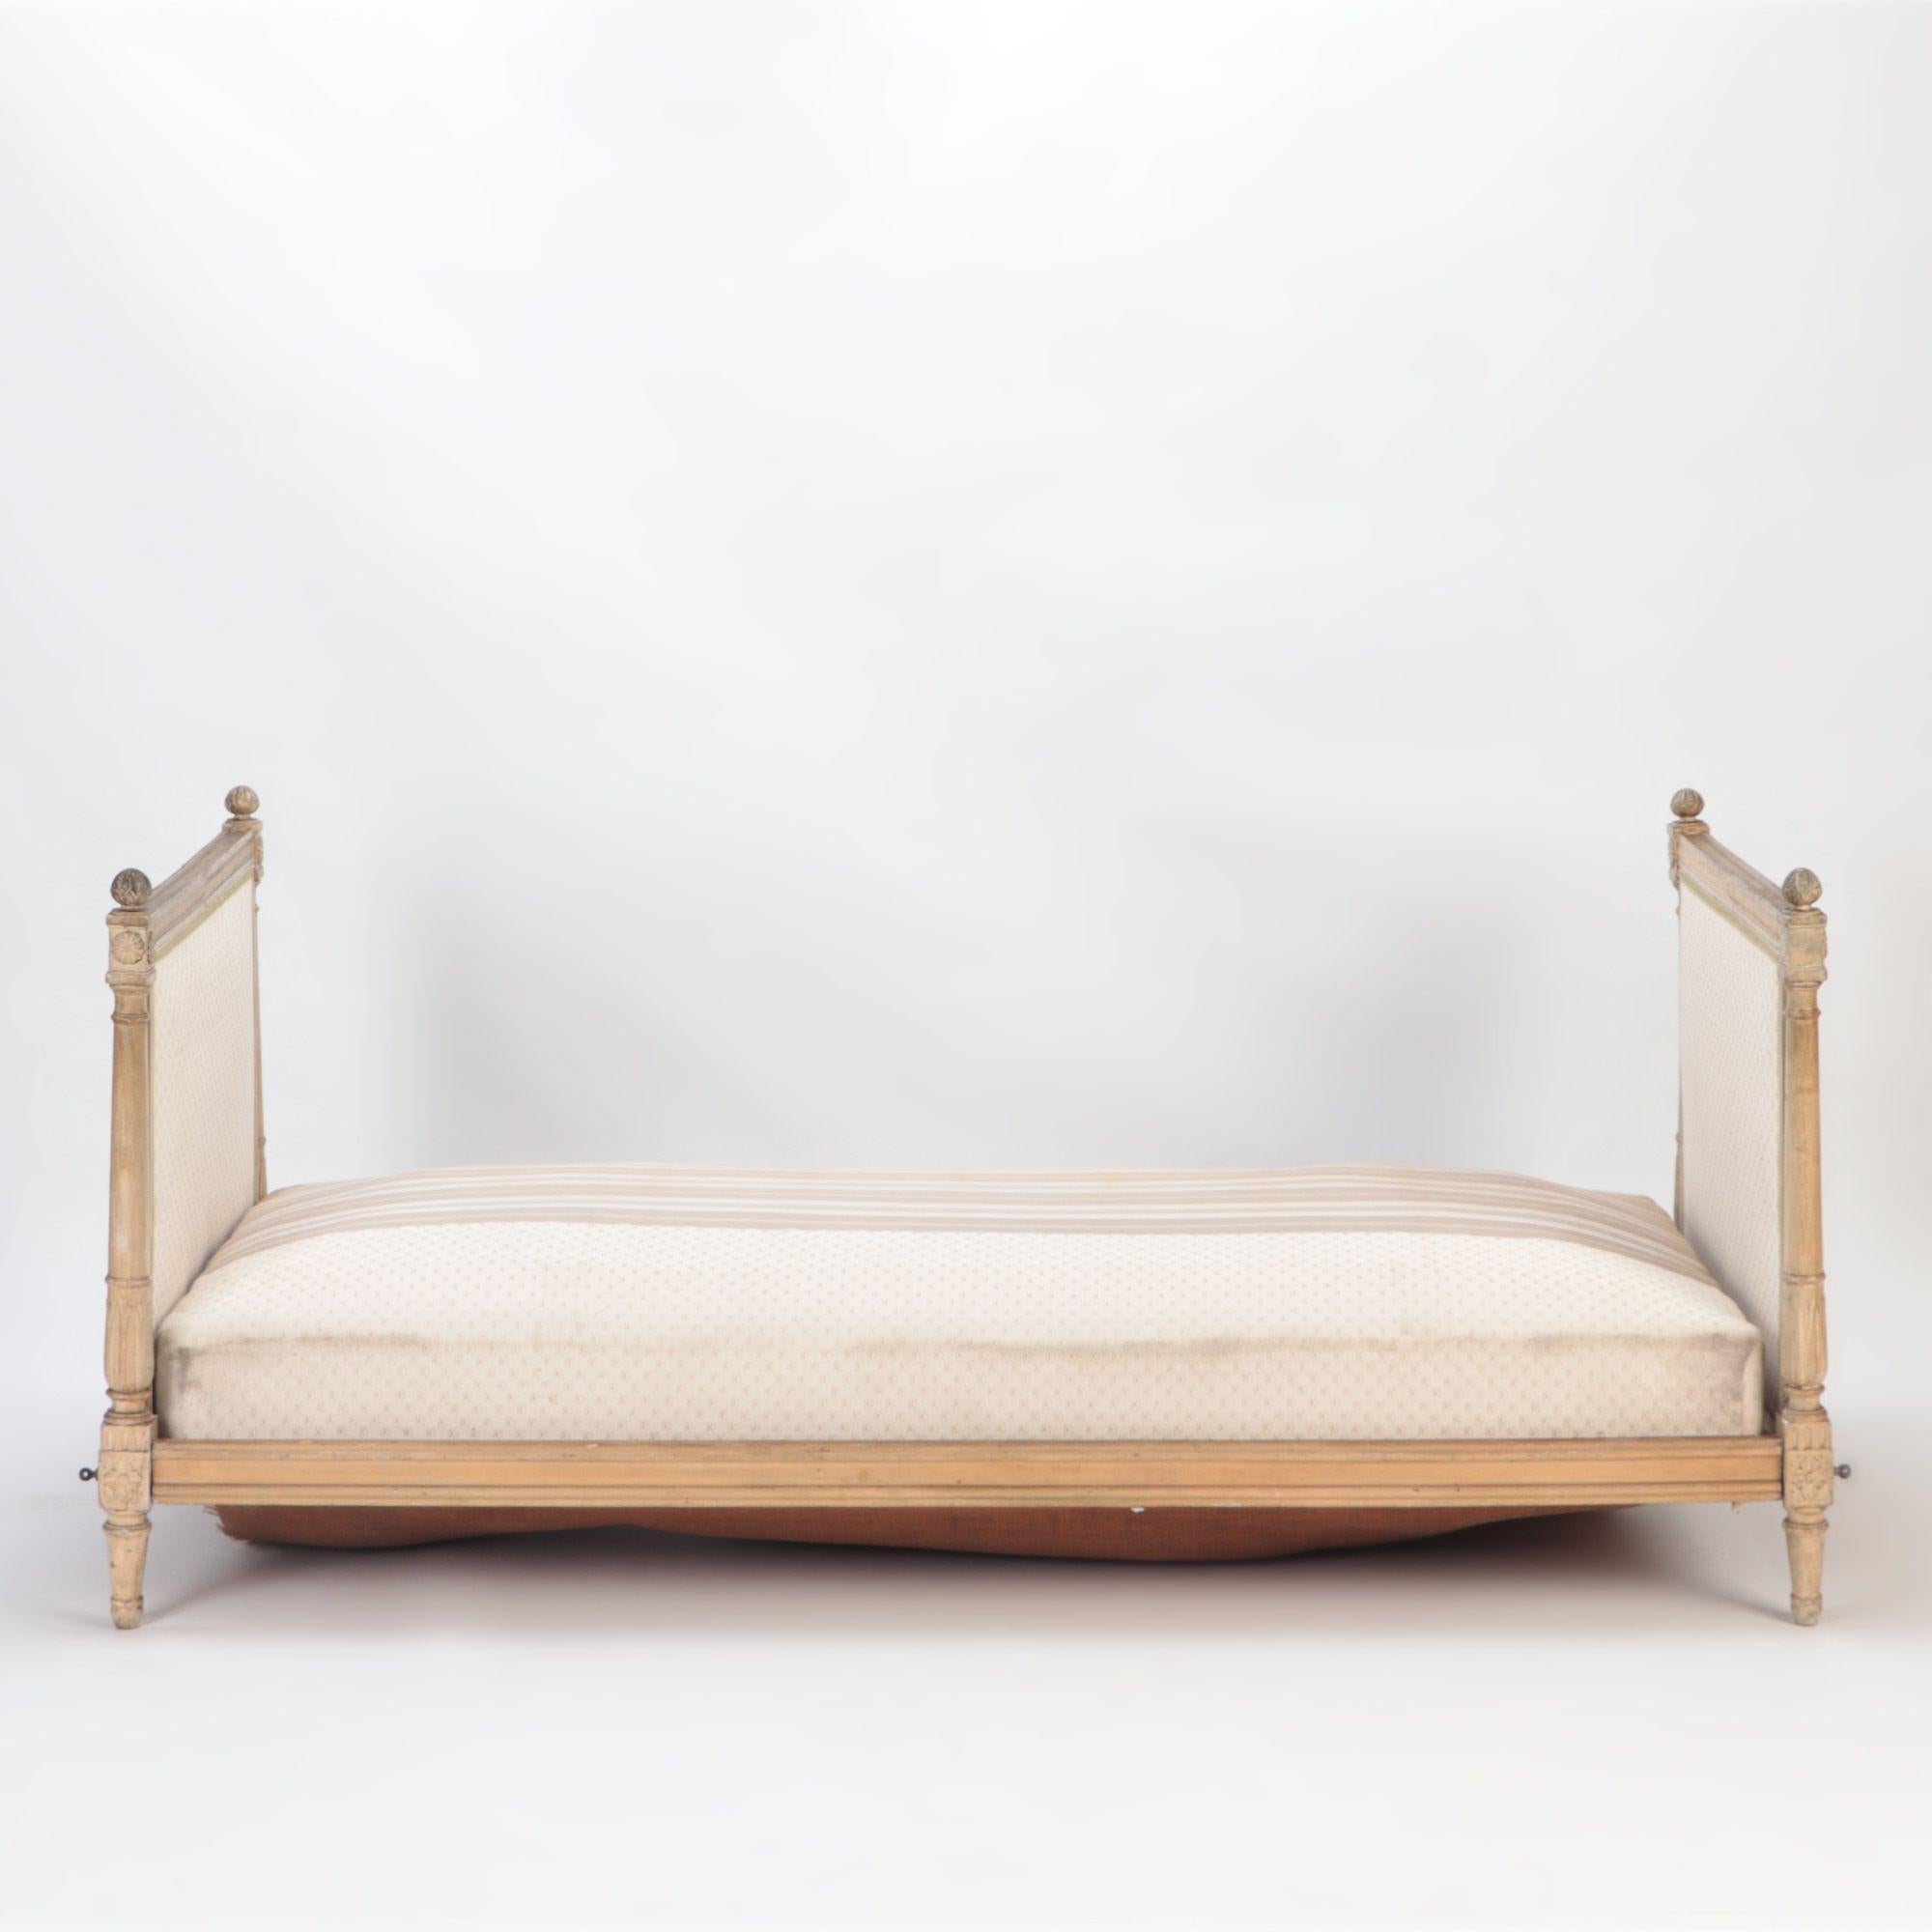 A Painted French Directoire style daybed with cushions C 1910.
Interior dimensions: 31